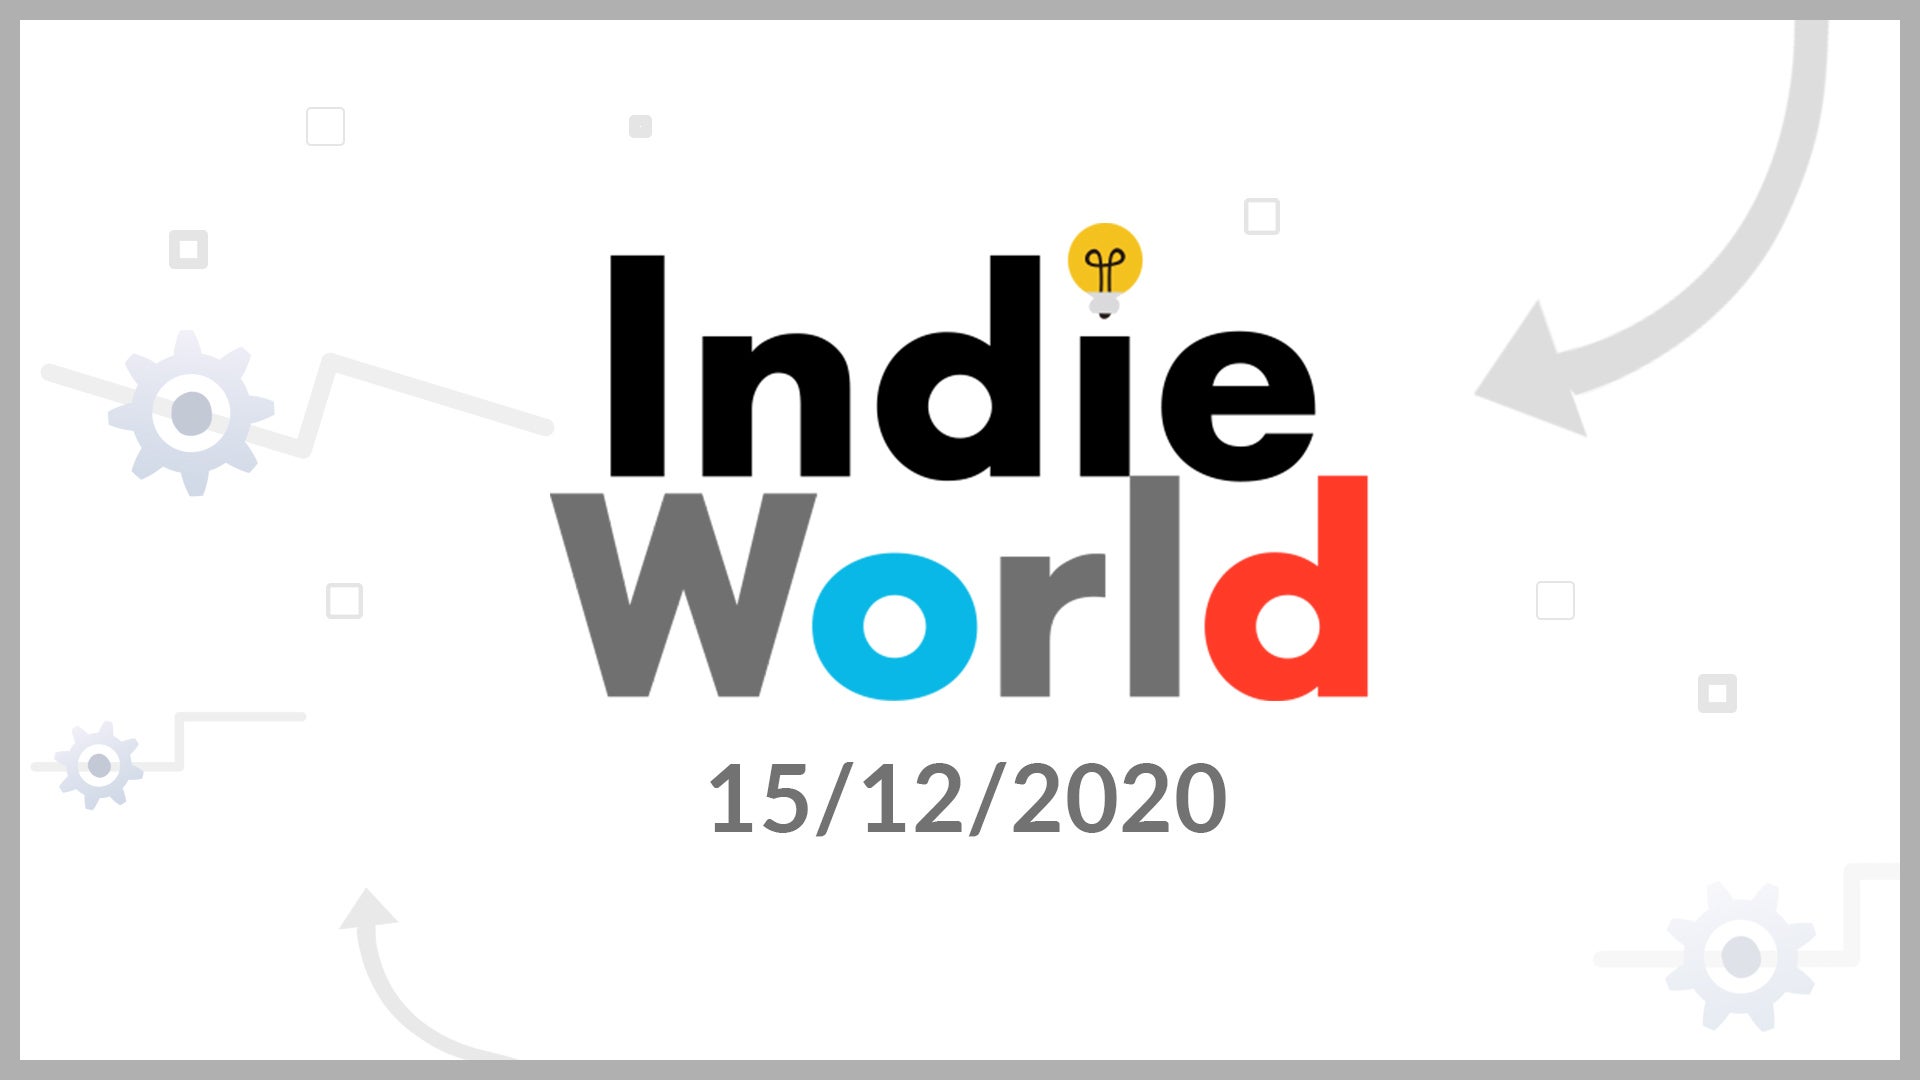 Image for Nintendo Indie World showcase to reveal new games tomorrow, December 15